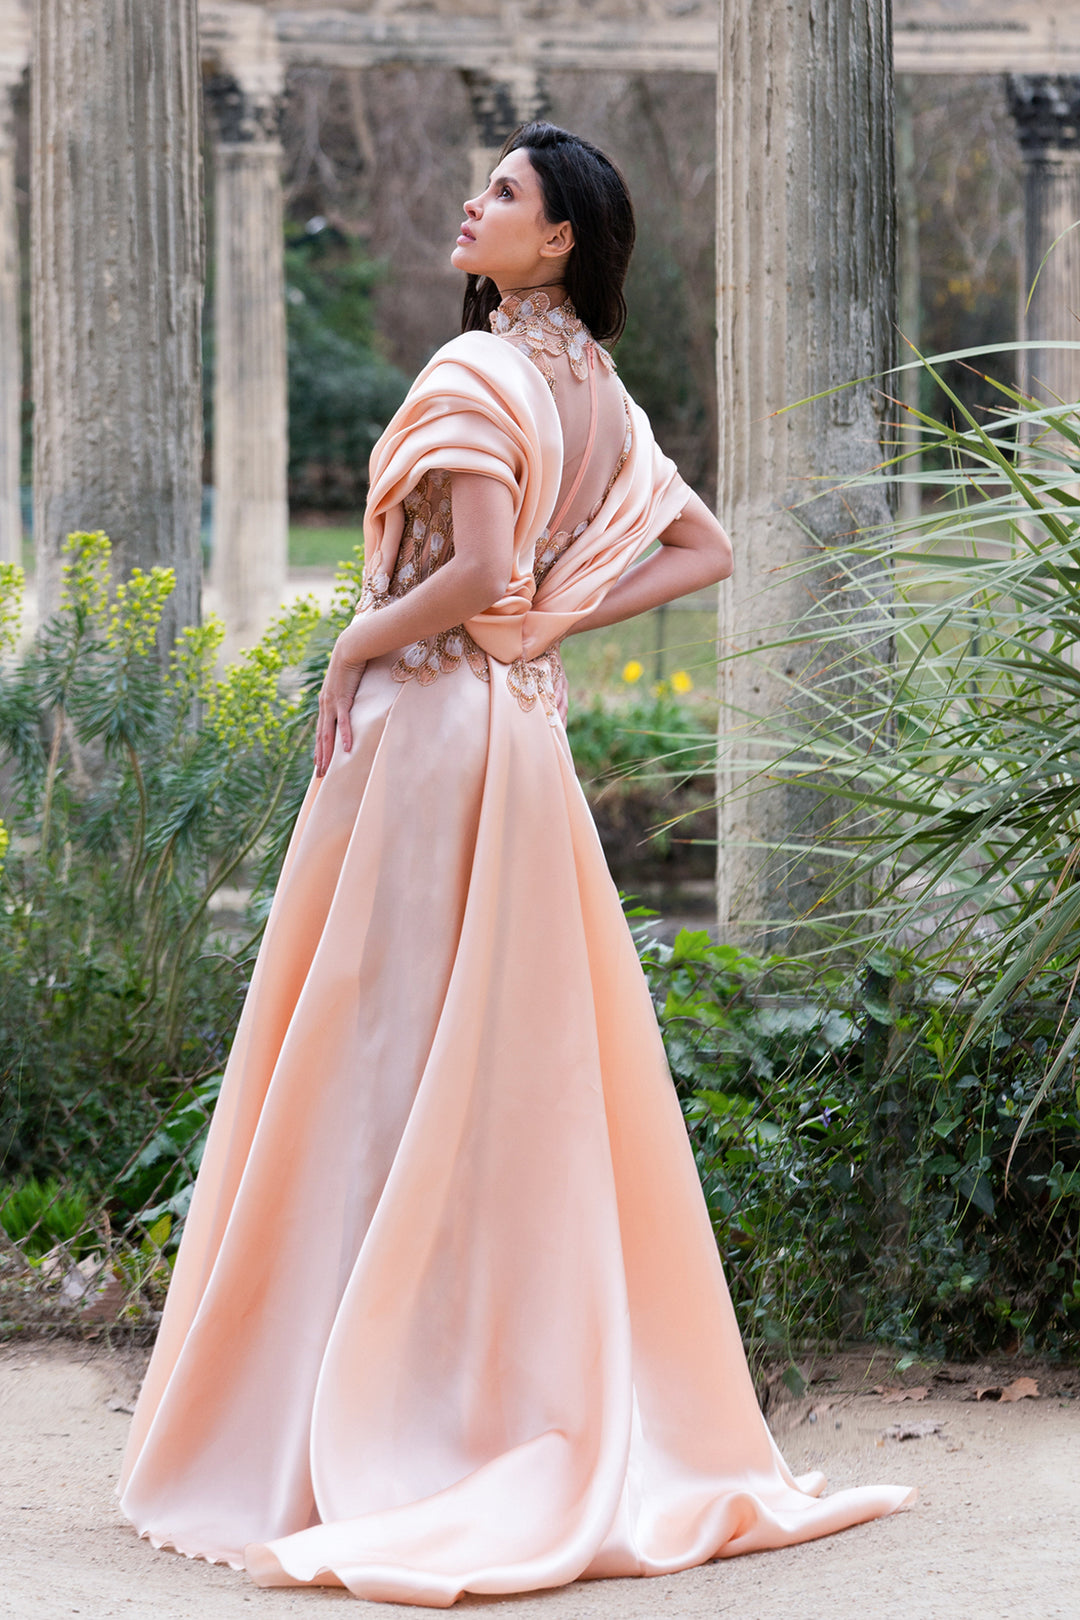 Peach Evening Dress with Embroidered Floral Motifs